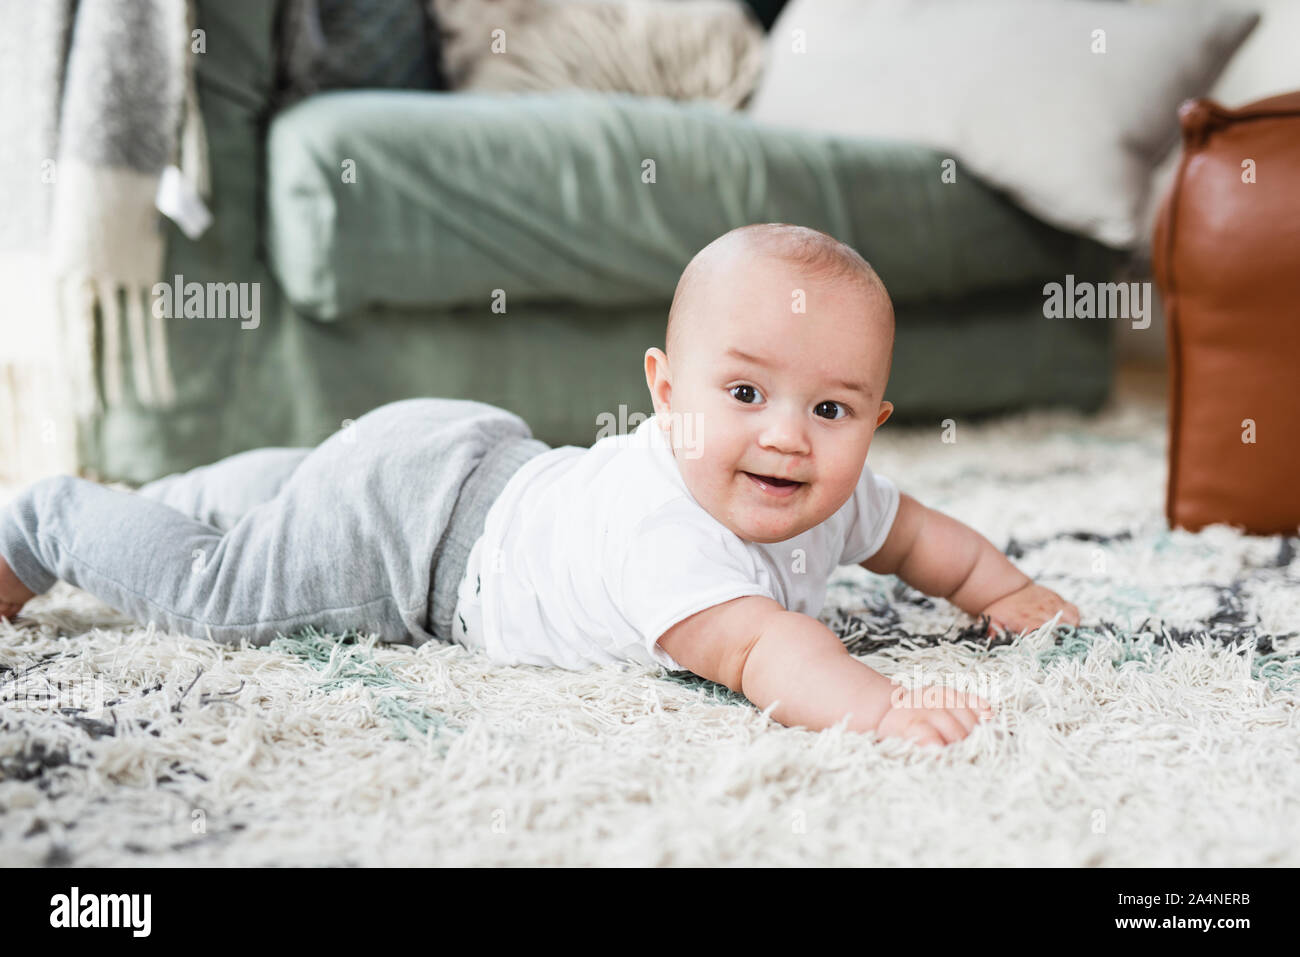 Baby Boy lying on carpet Banque D'Images